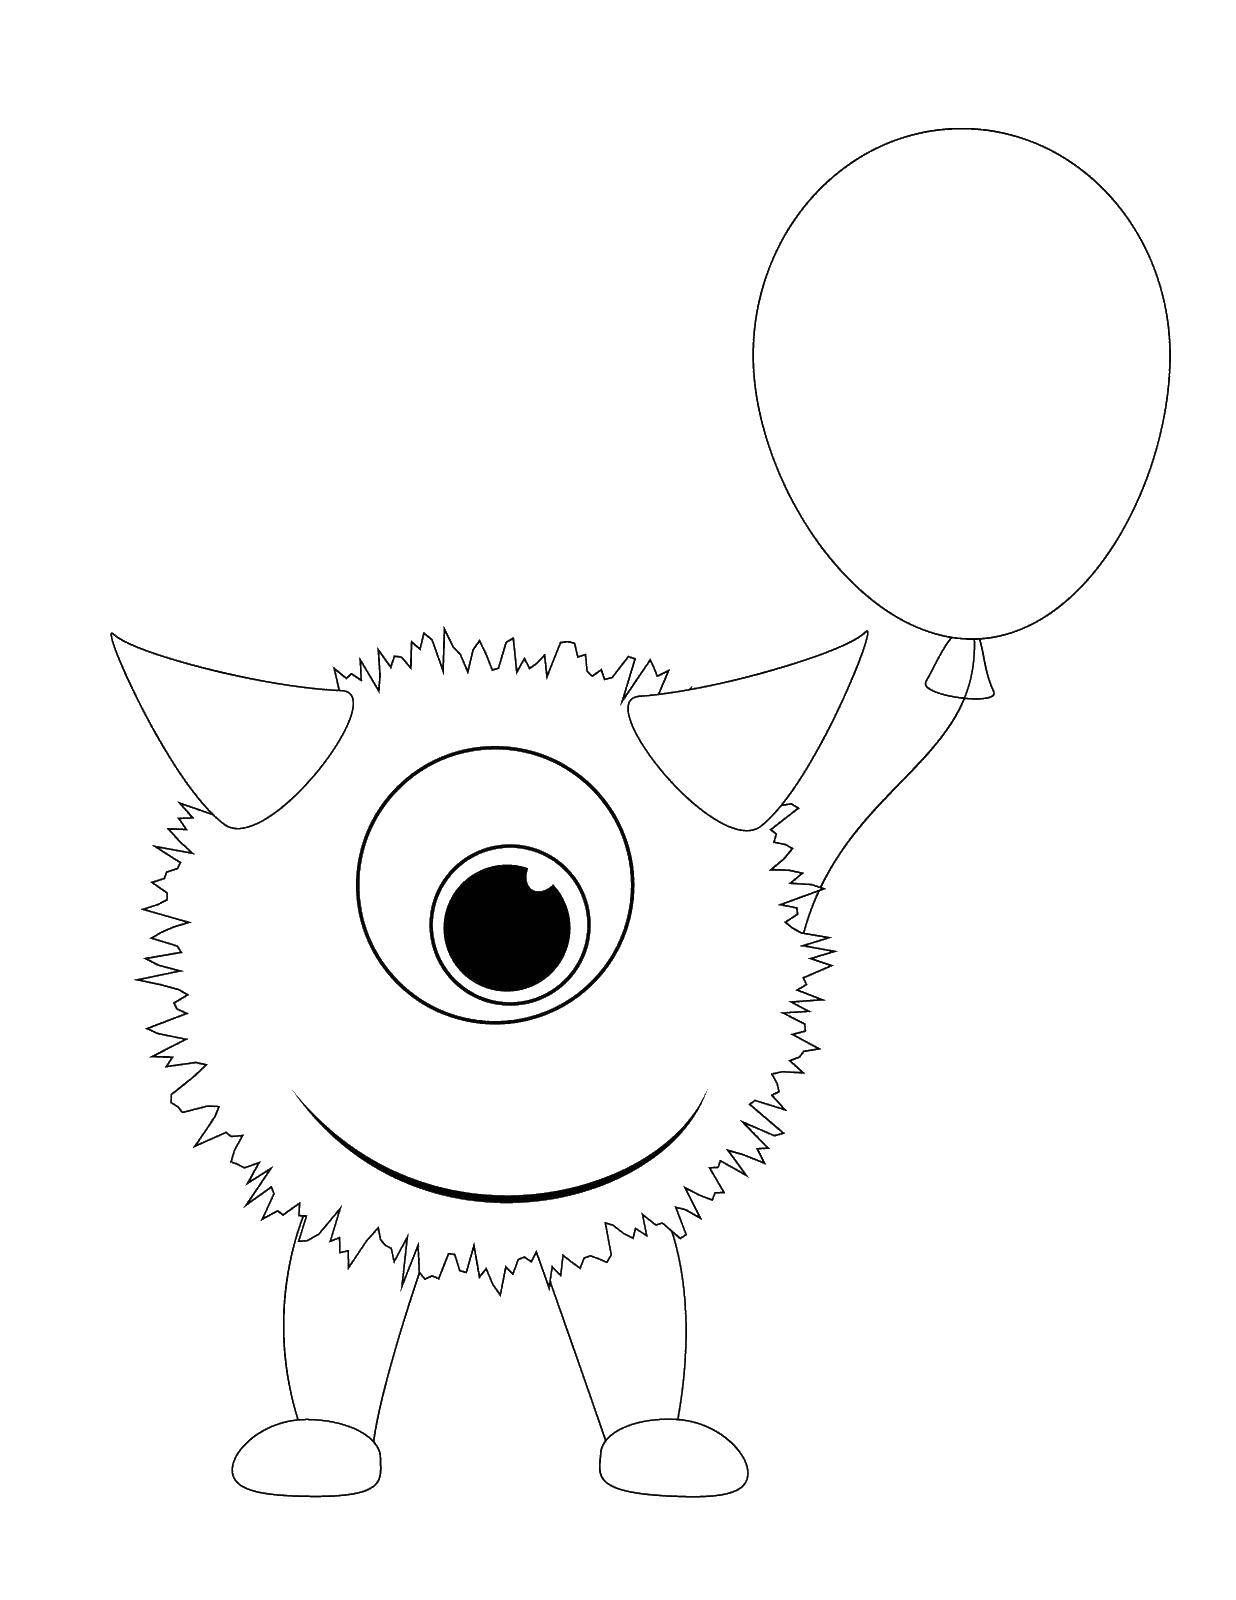 Coloring Monster ball. Category Monsters. Tags:  monster, balls.